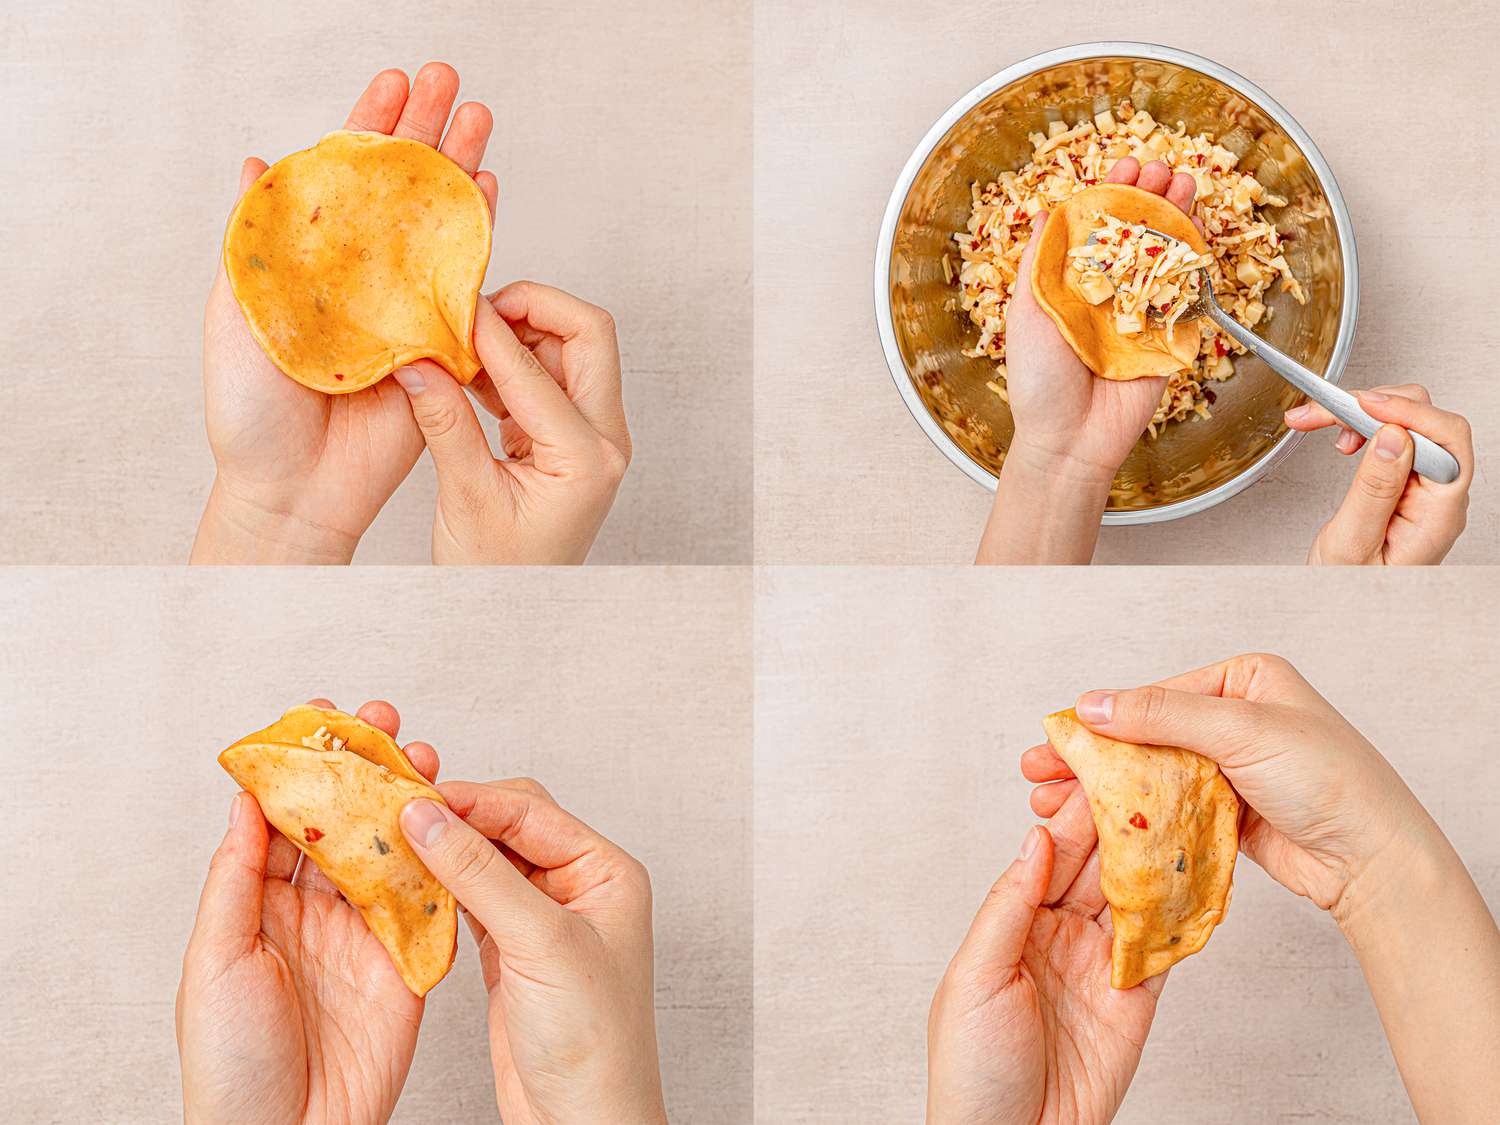 Four image collage showing how to cup dough disc in hand, fill with cheese-potato-onion mixture, and pinching closed into a half moon shape